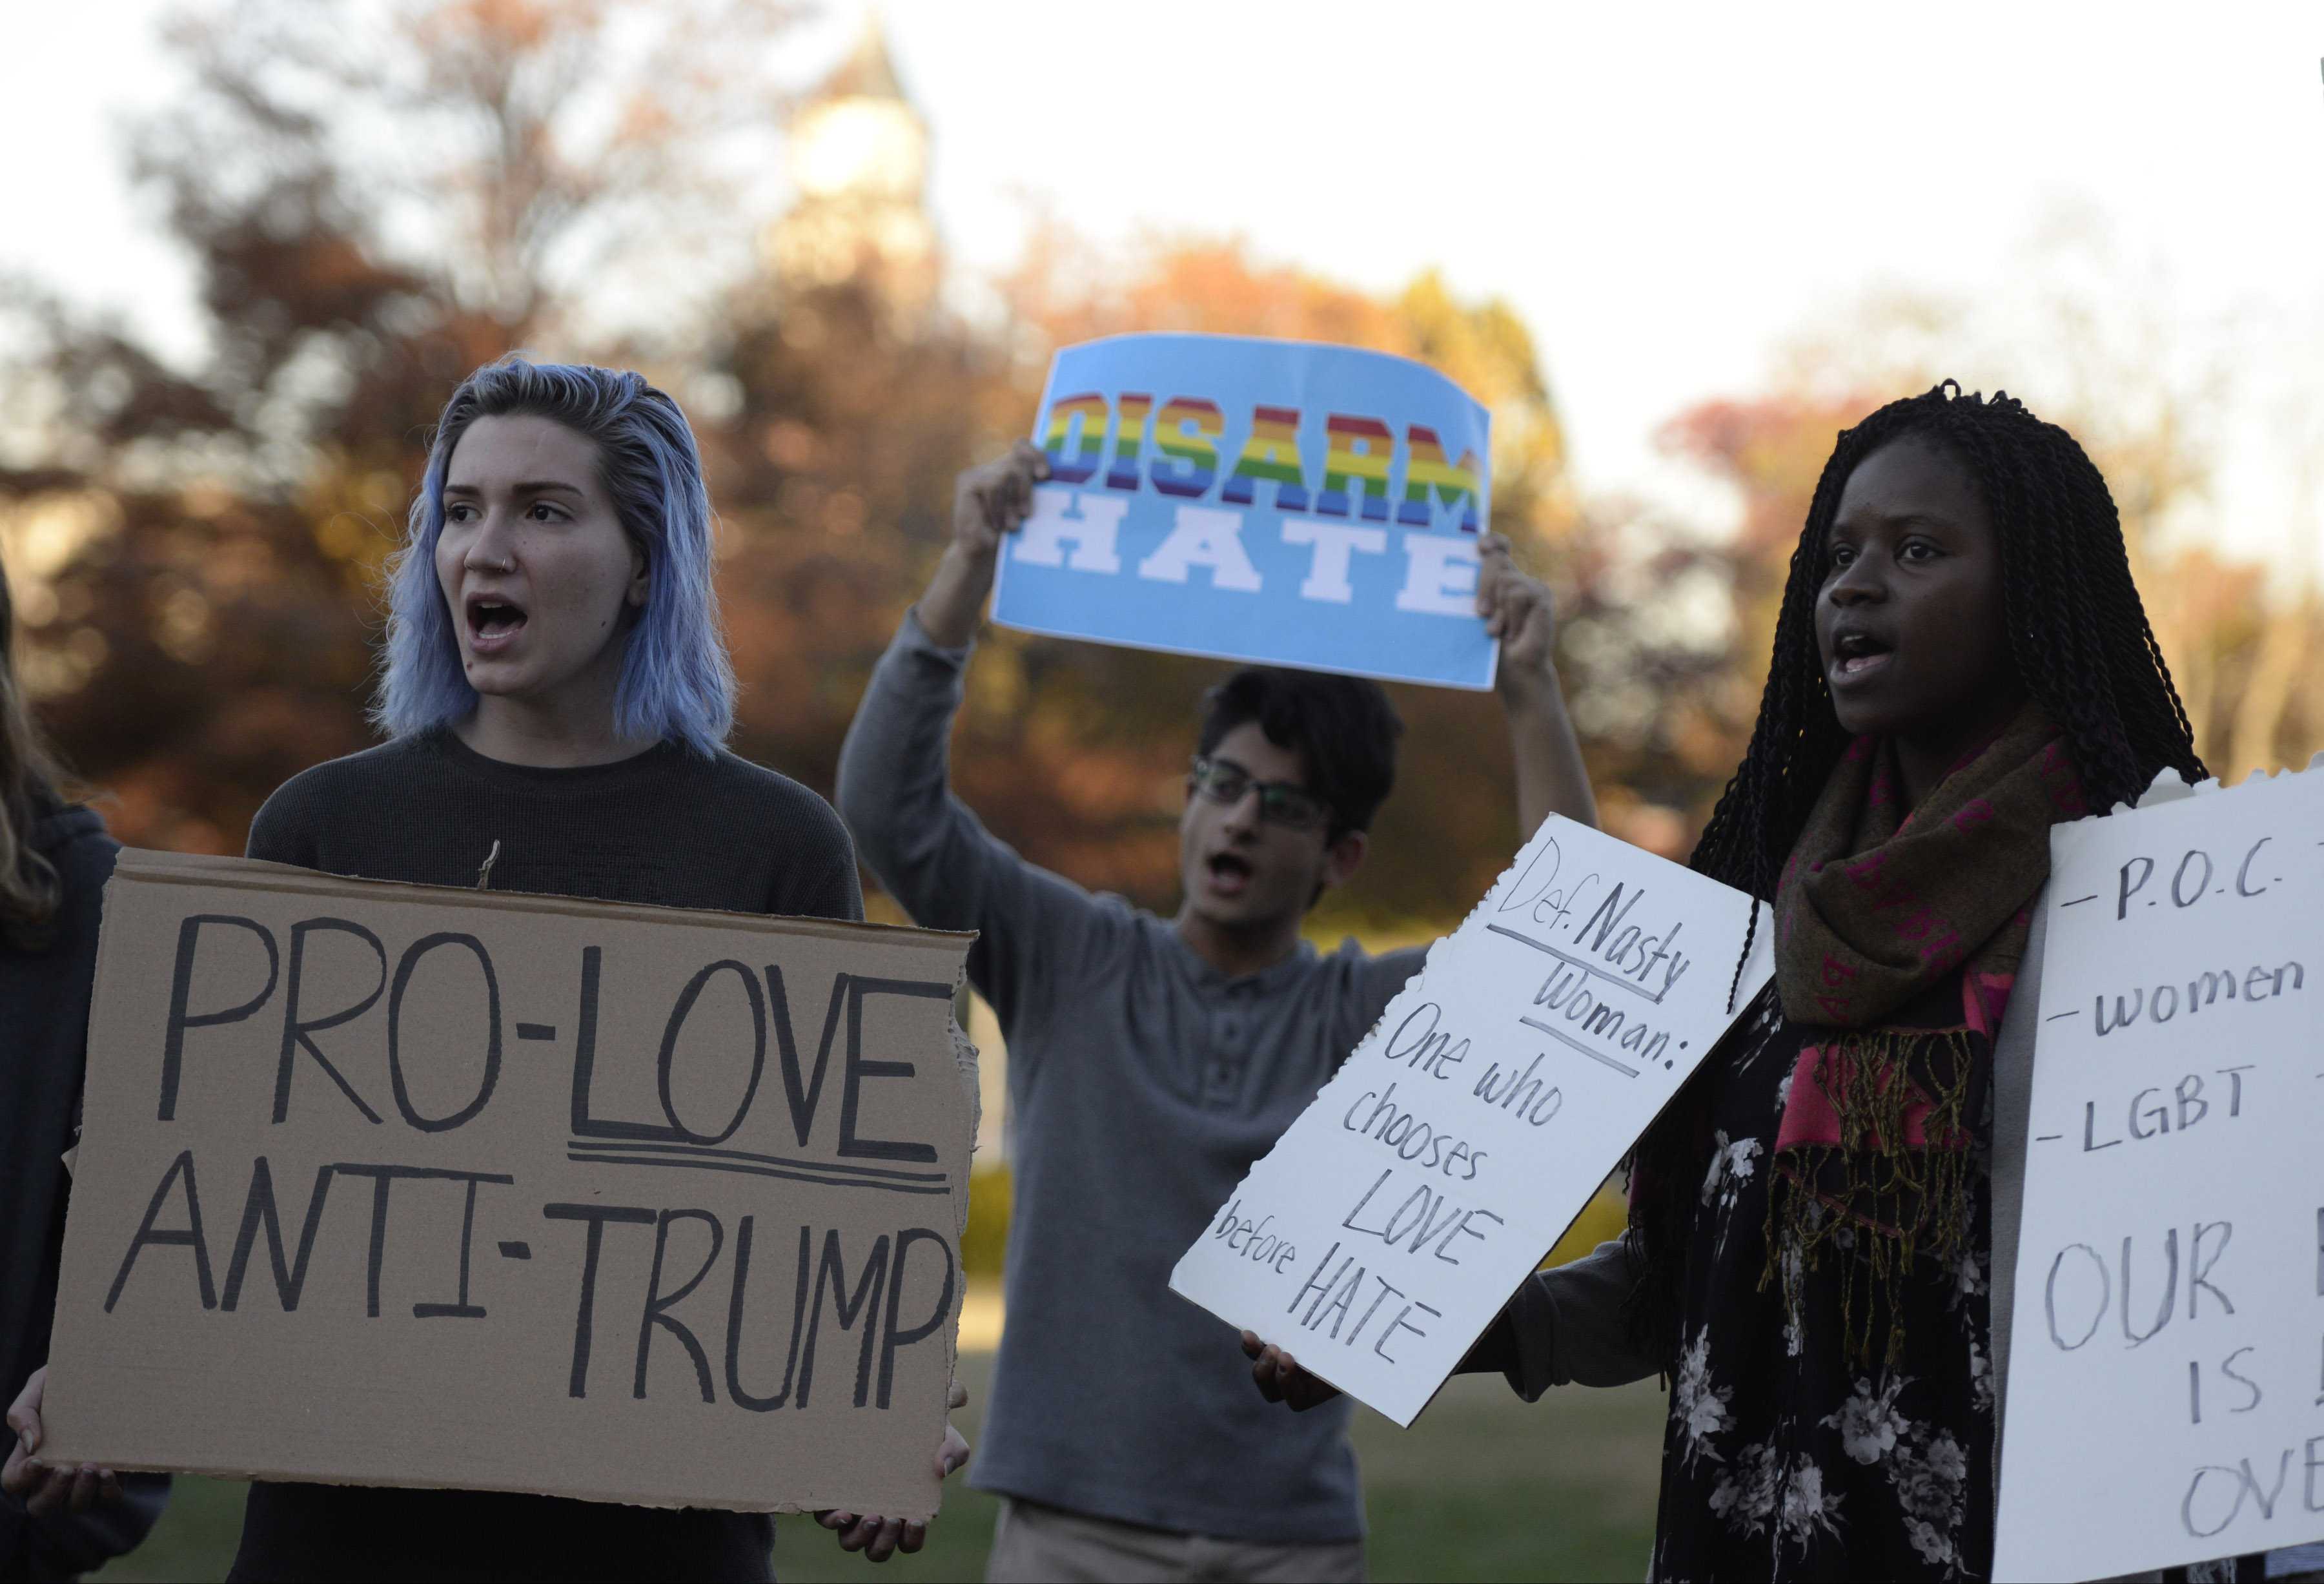 Demonstrators gather Wednesday, Nov. 16, 2016, in front of Morris Library to protest a host of issues surrounding the election of Donald Trump as president. (Bill Lukitsch | @lukitsbill)